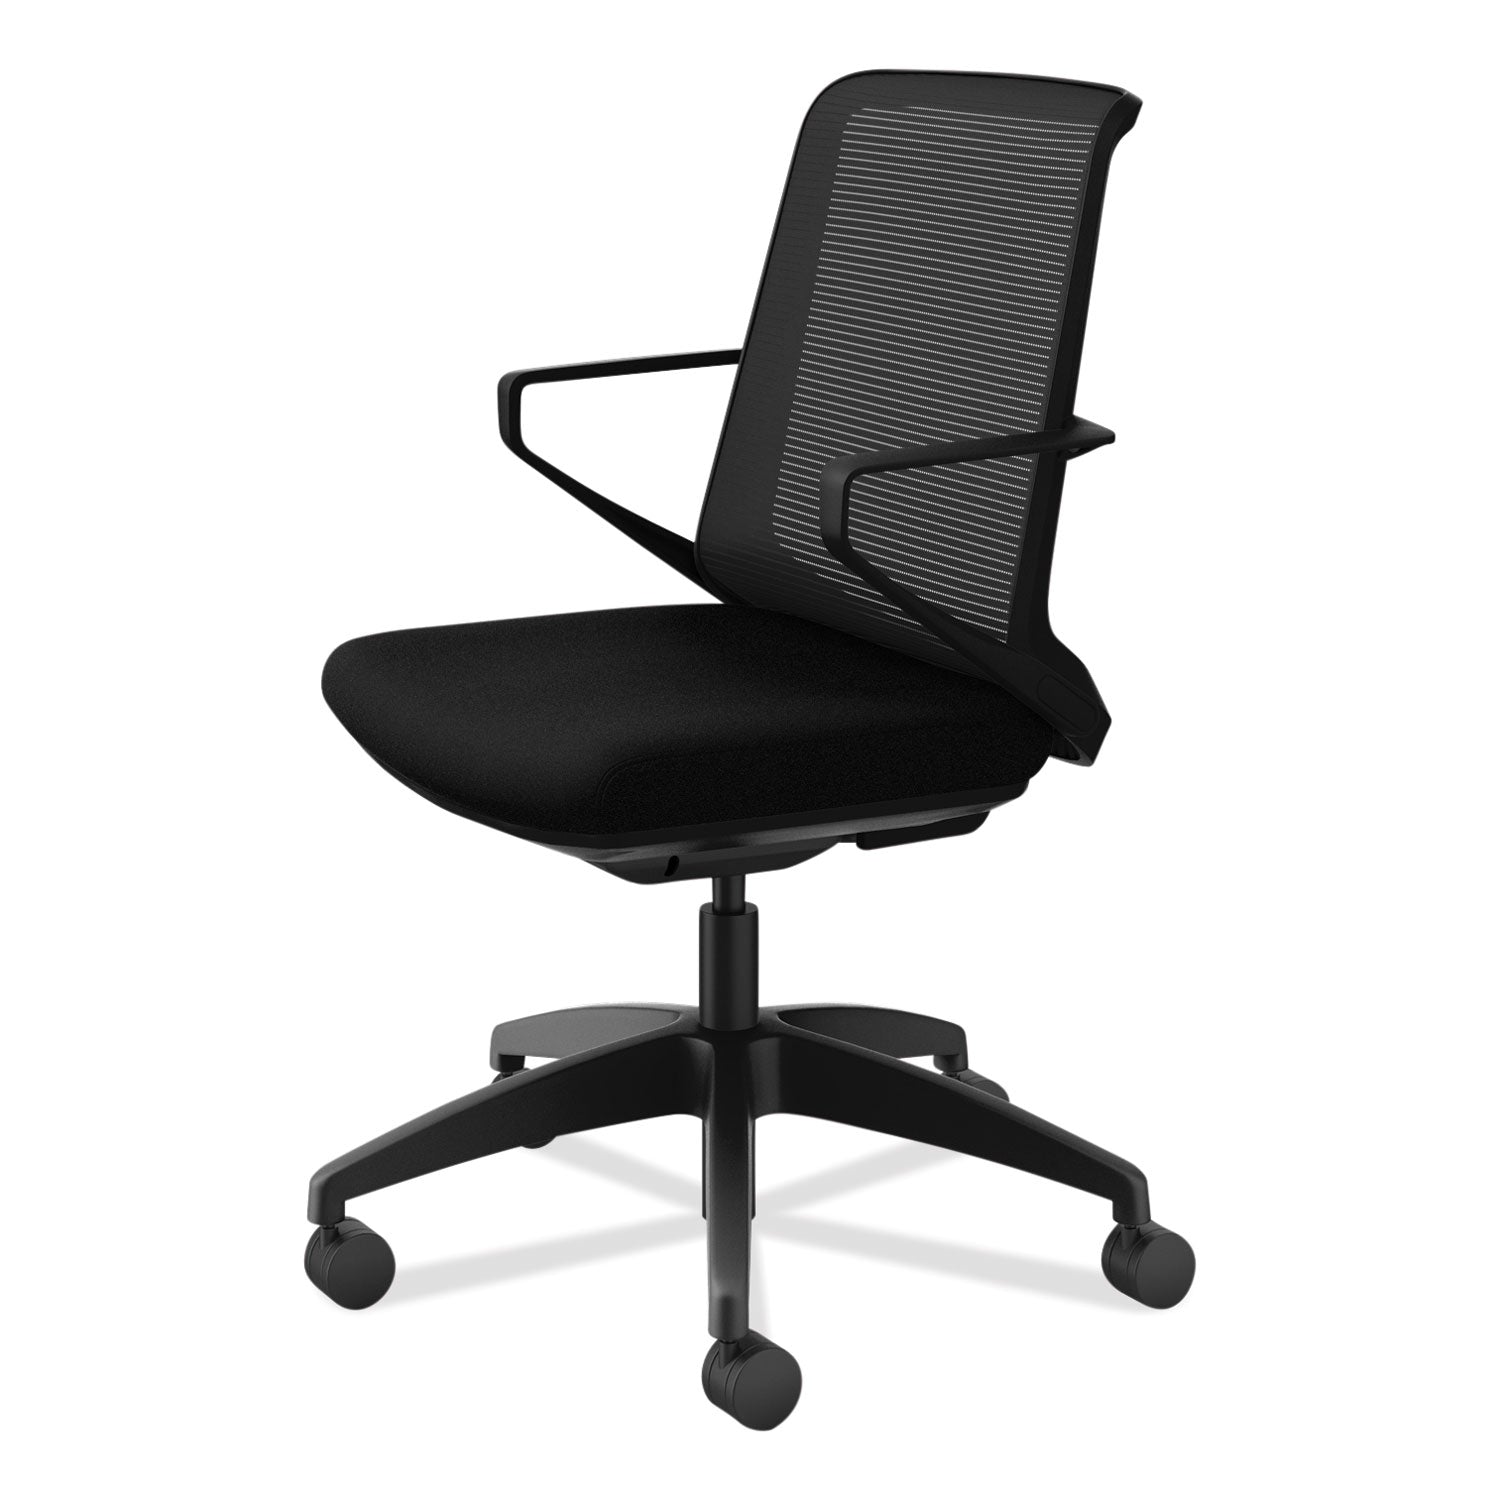 cliq-office-chair-supports-up-to-300-lb-17-to-22-seat-height-black-seat-back-black-base-ships-in-7-10-business-days_honclqimcu10t - 8